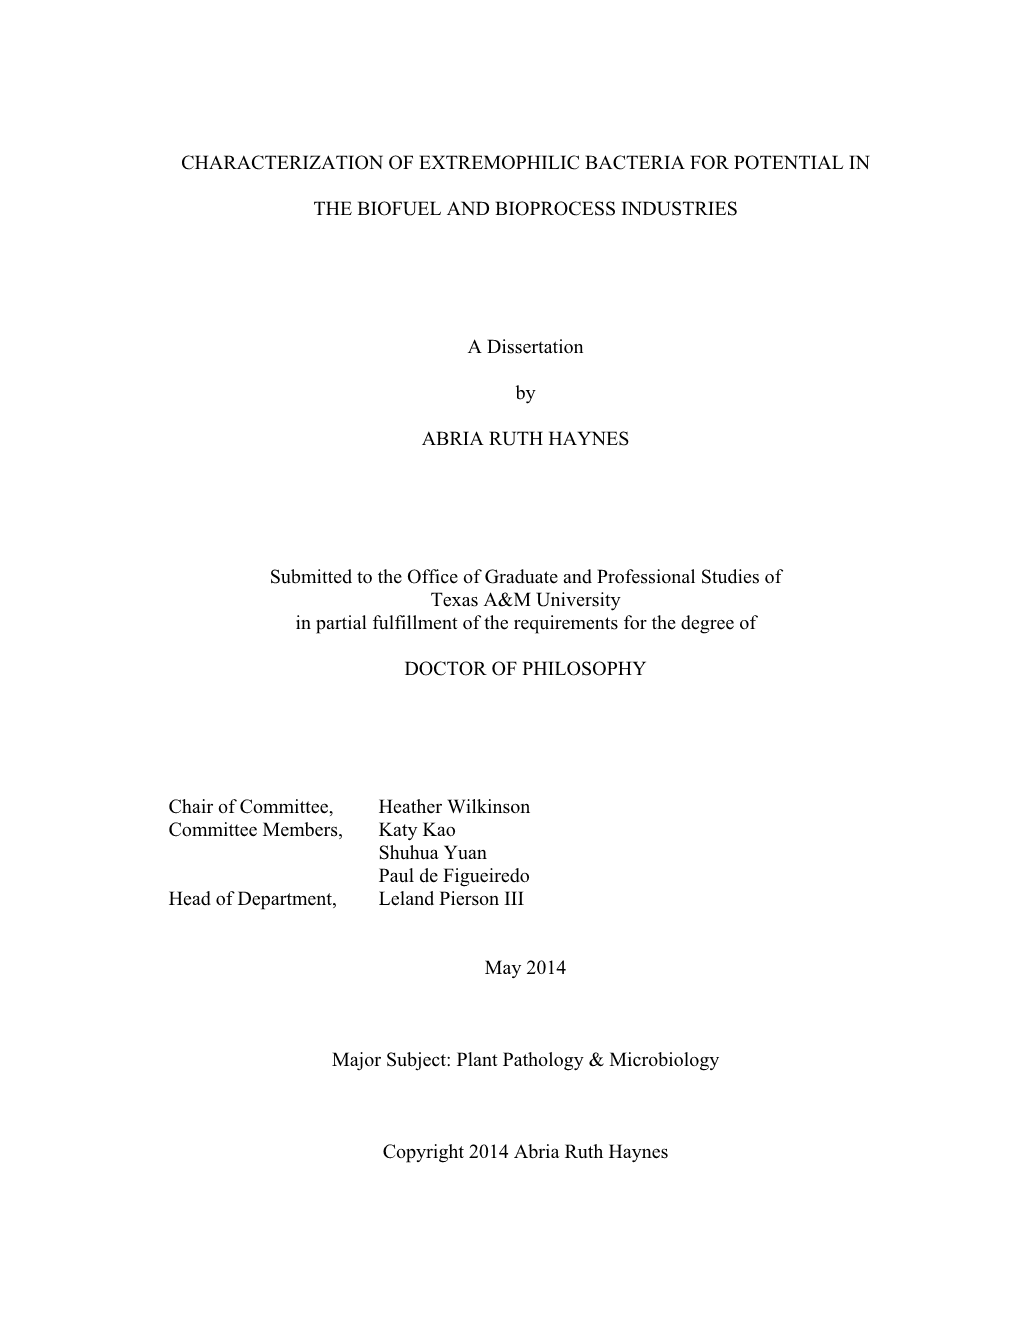 CHARACTERIZATION of EXTREMOPHILIC BACTERIA for POTENTIAL in the BIOFUEL and BIOPROCESS INDUSTRIES a Dissertation by ABRIA RUTH H